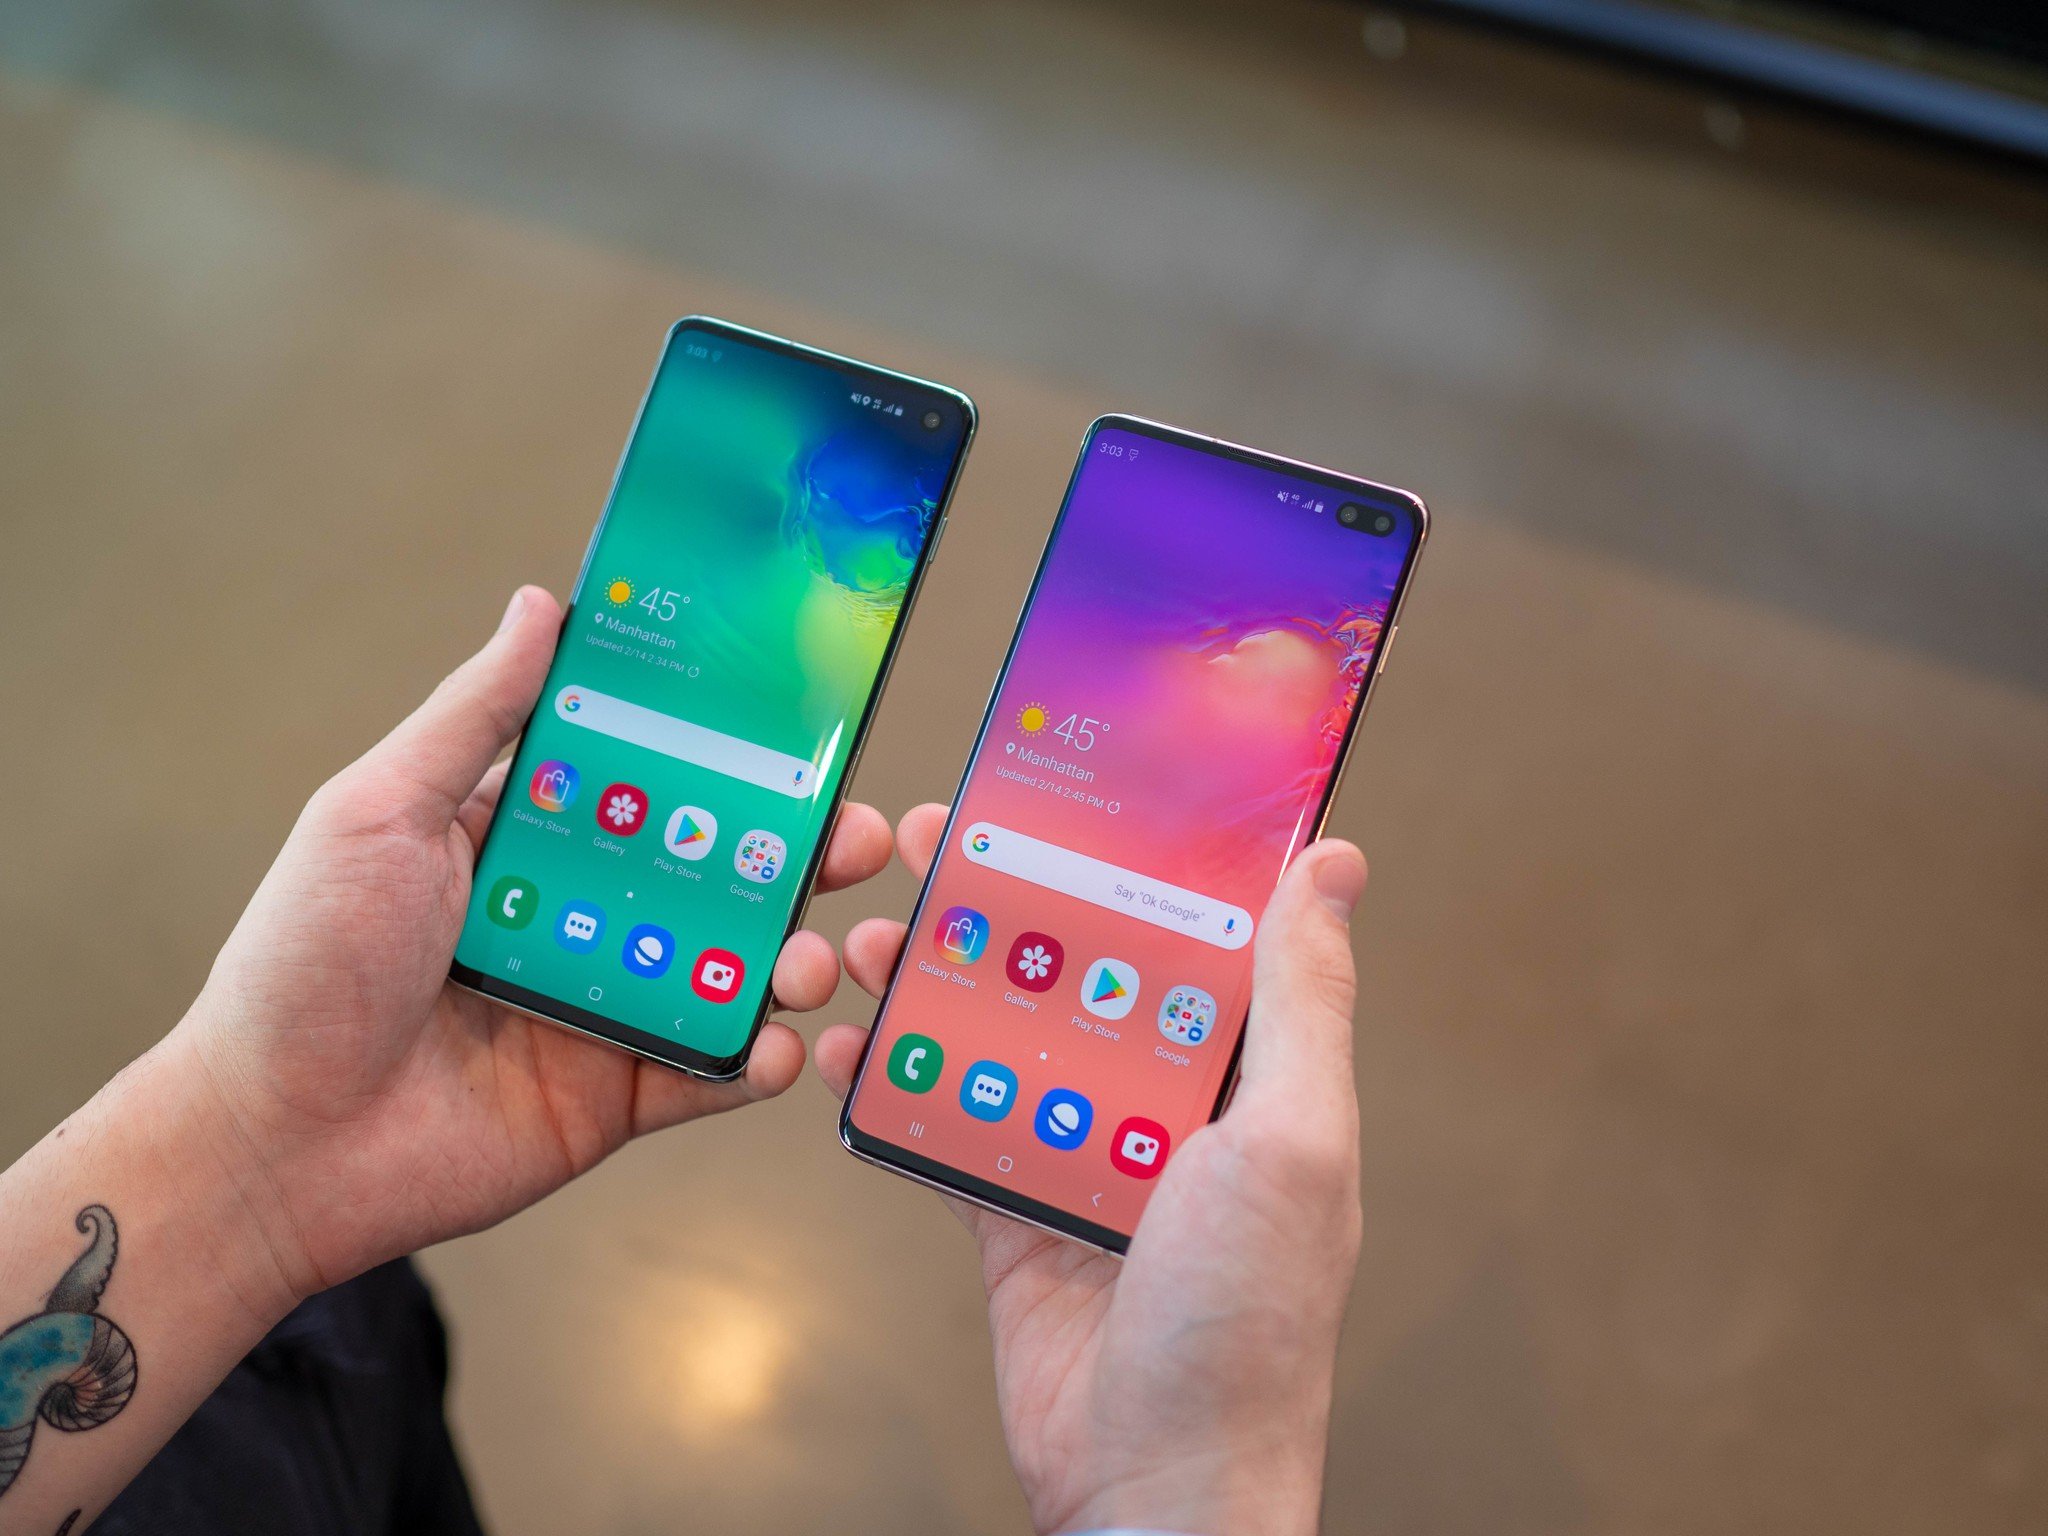 https://www.androidcentral.com/sites/androidcentral.com/files/styles/large_wm_brw/public/article_images/2019/02/samsung-galaxy-s10-s10plus-front-1.jpg?itok=rW3H4Dod